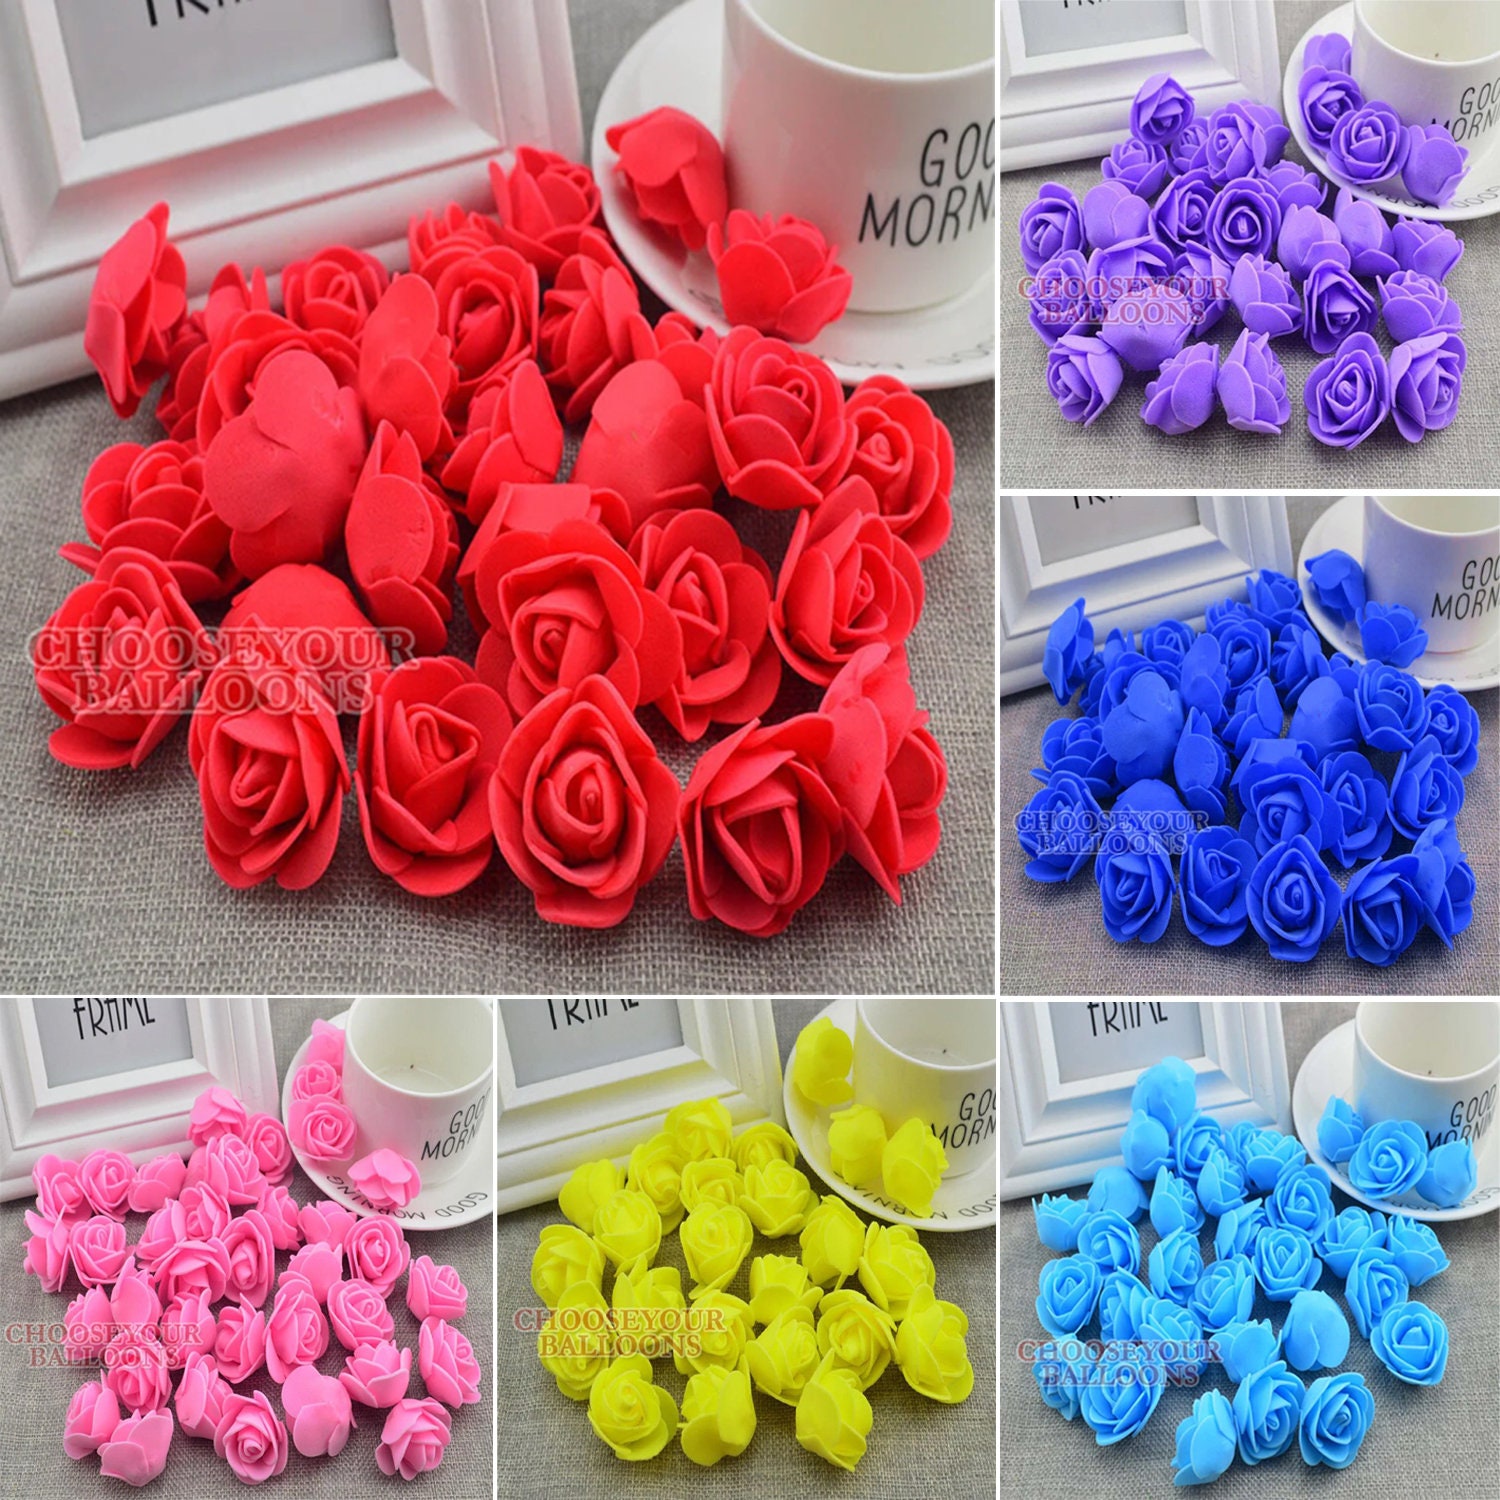 100x Artificial Fake Flower Heads Roses for Wedding Decoration and